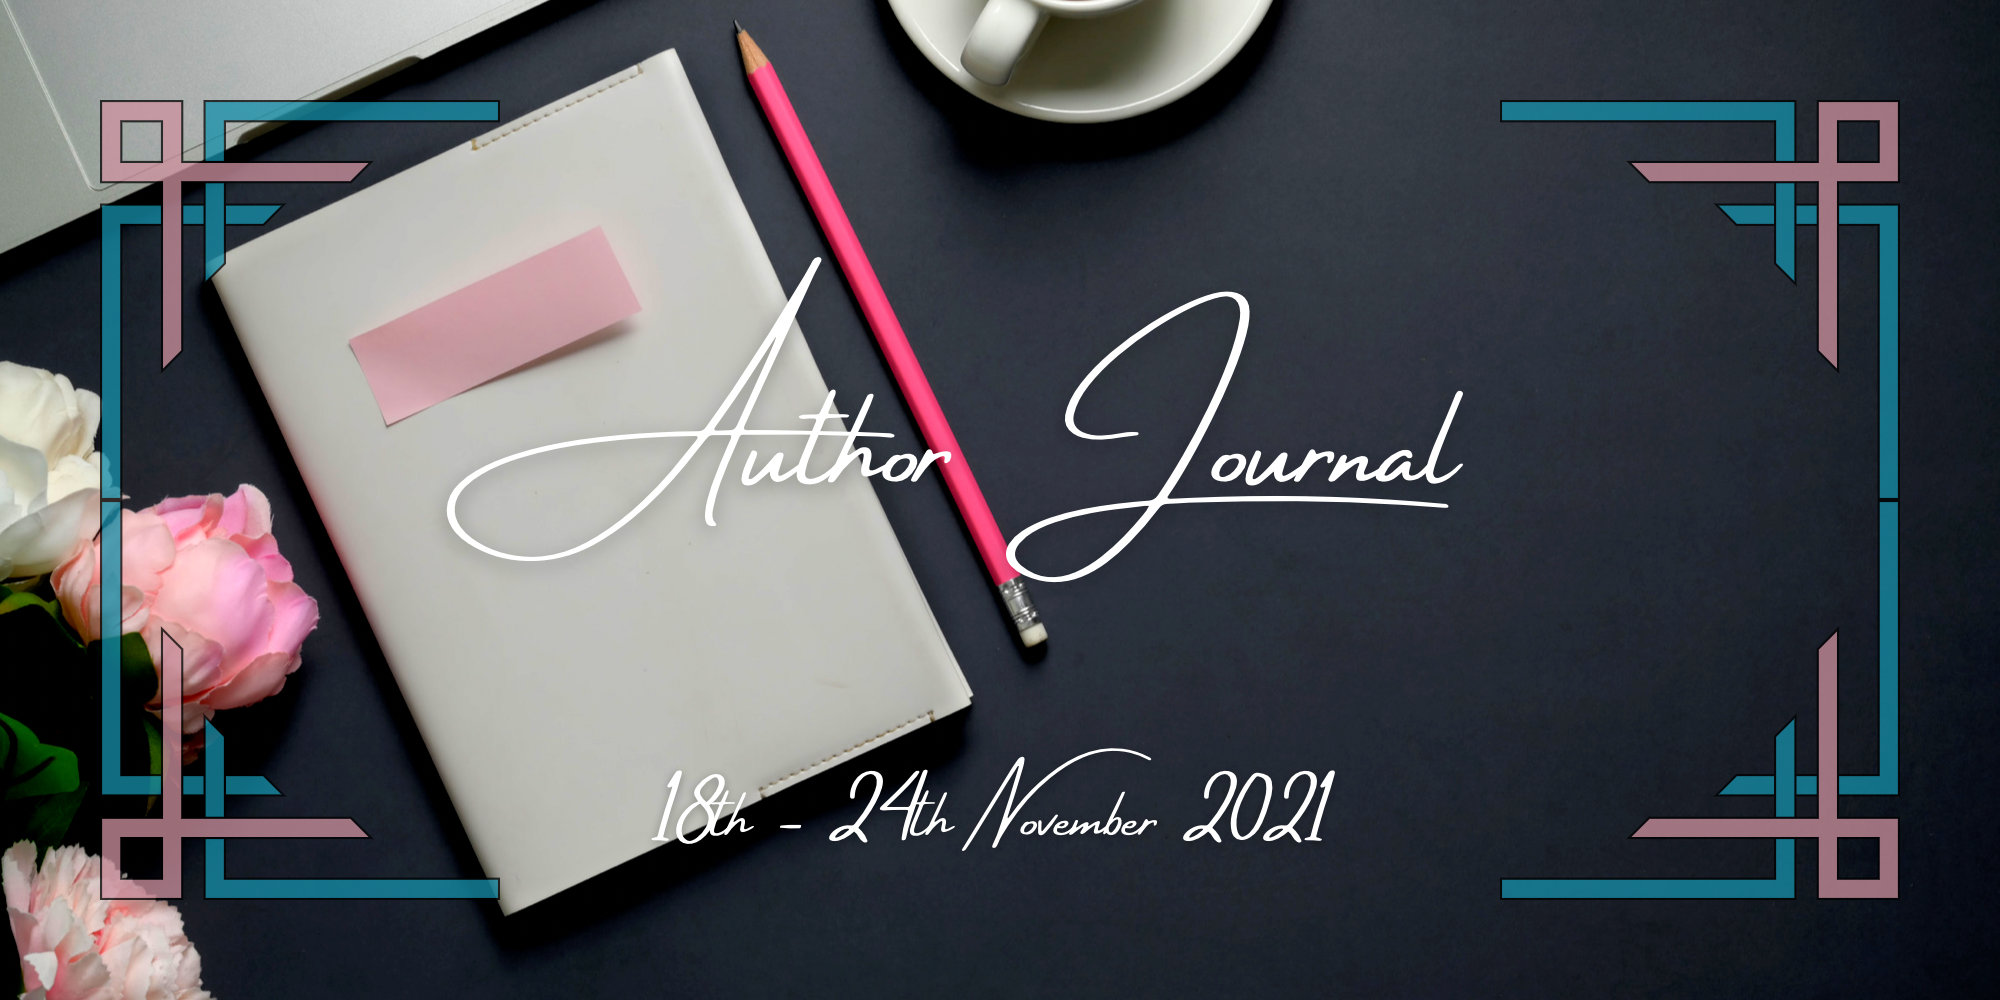 Author Journal 18th – 24th November 2021